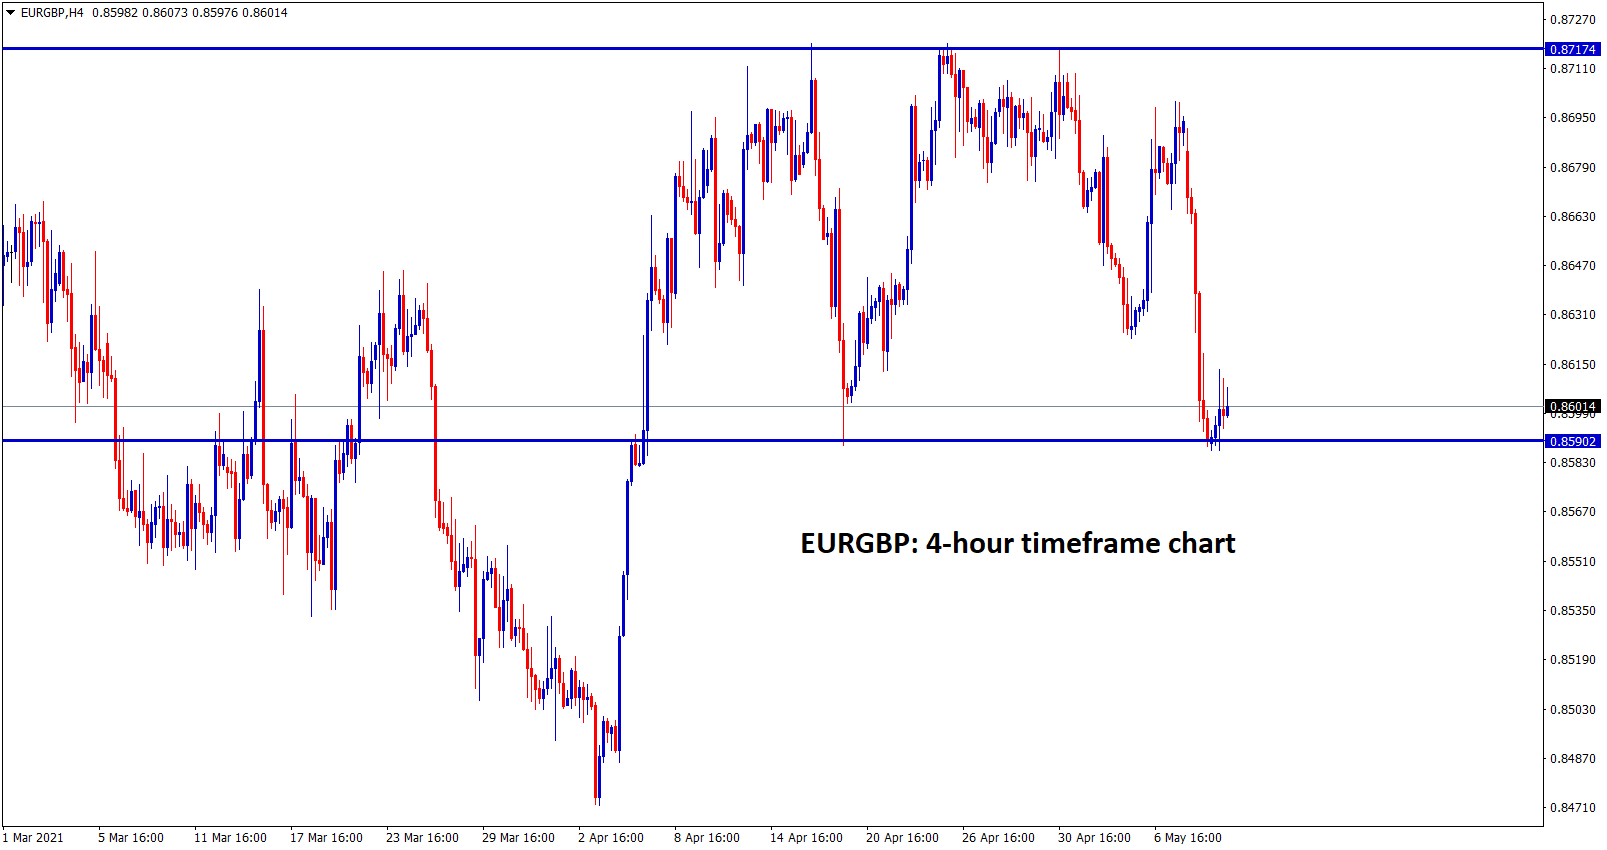 EURGBP at the support level wait for bounce back or breakout